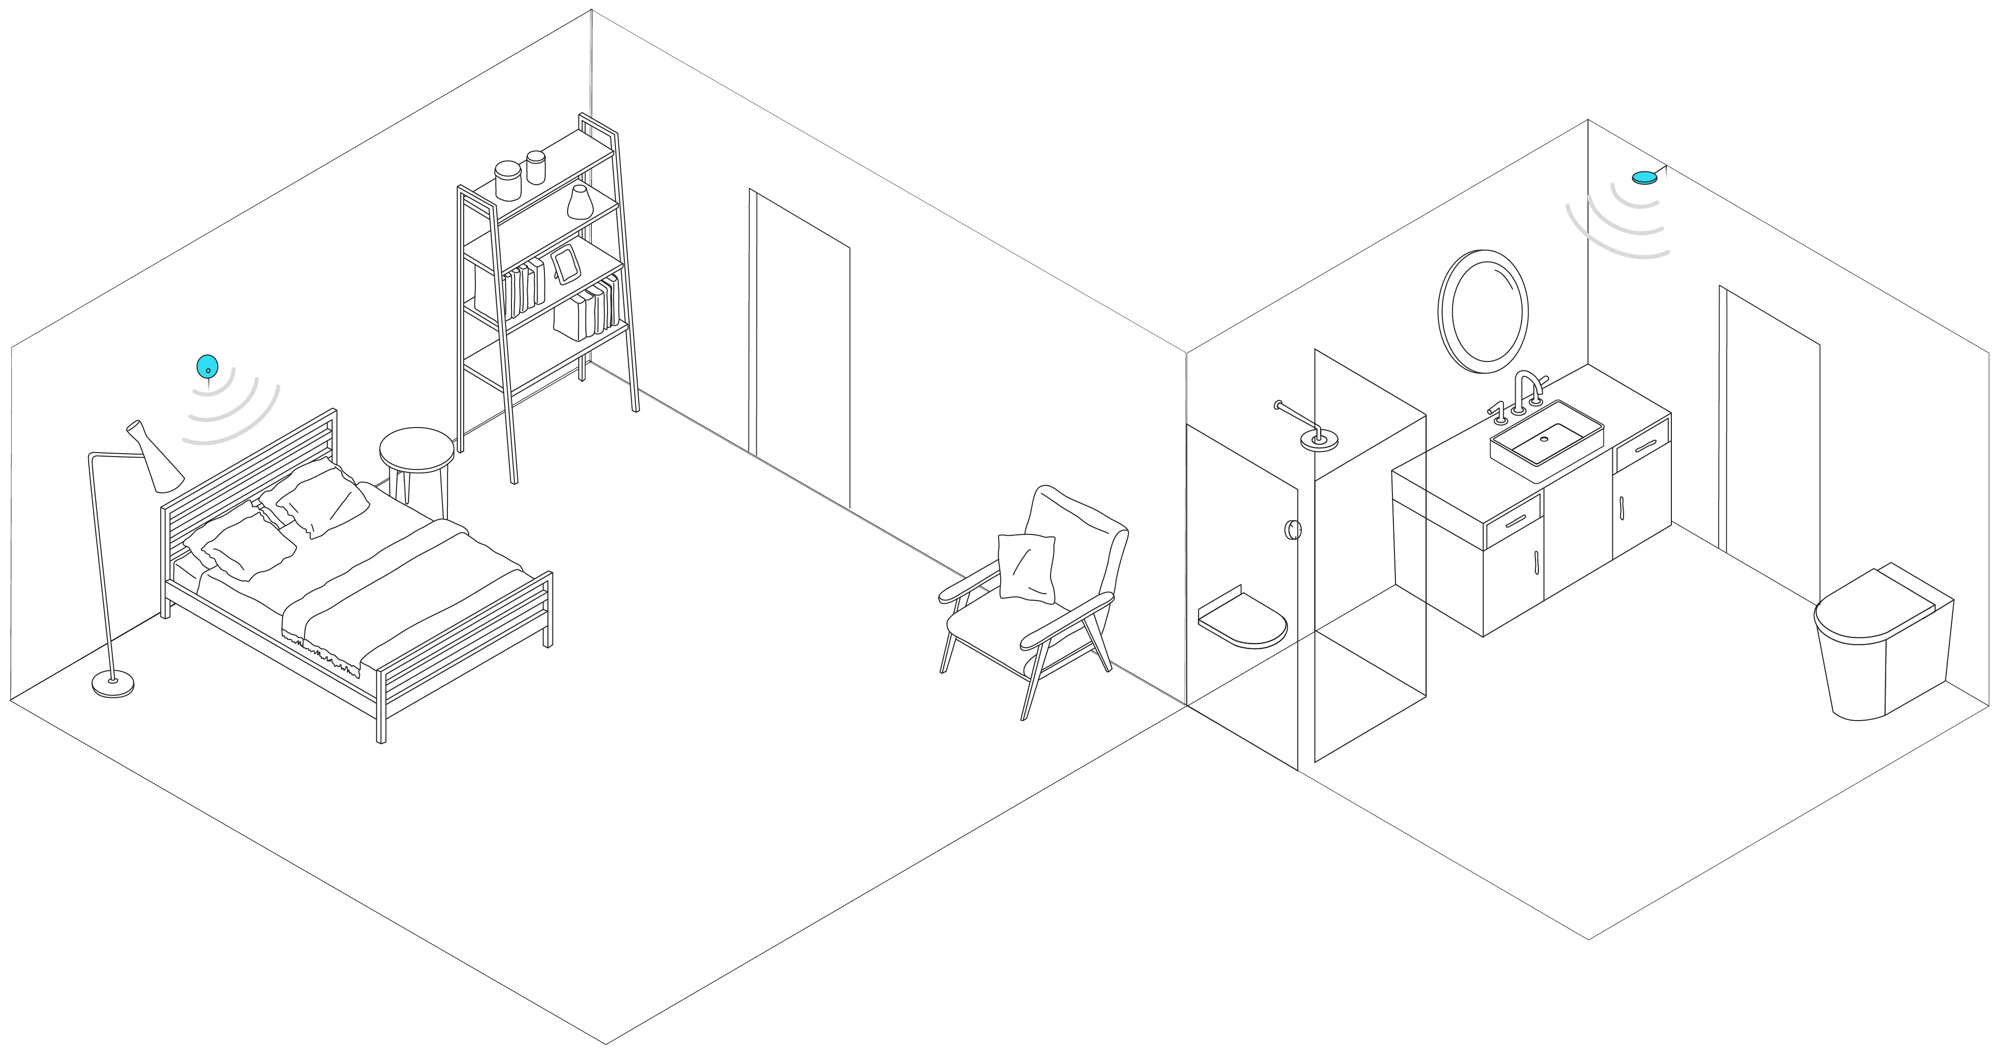 Two rooms with sensors